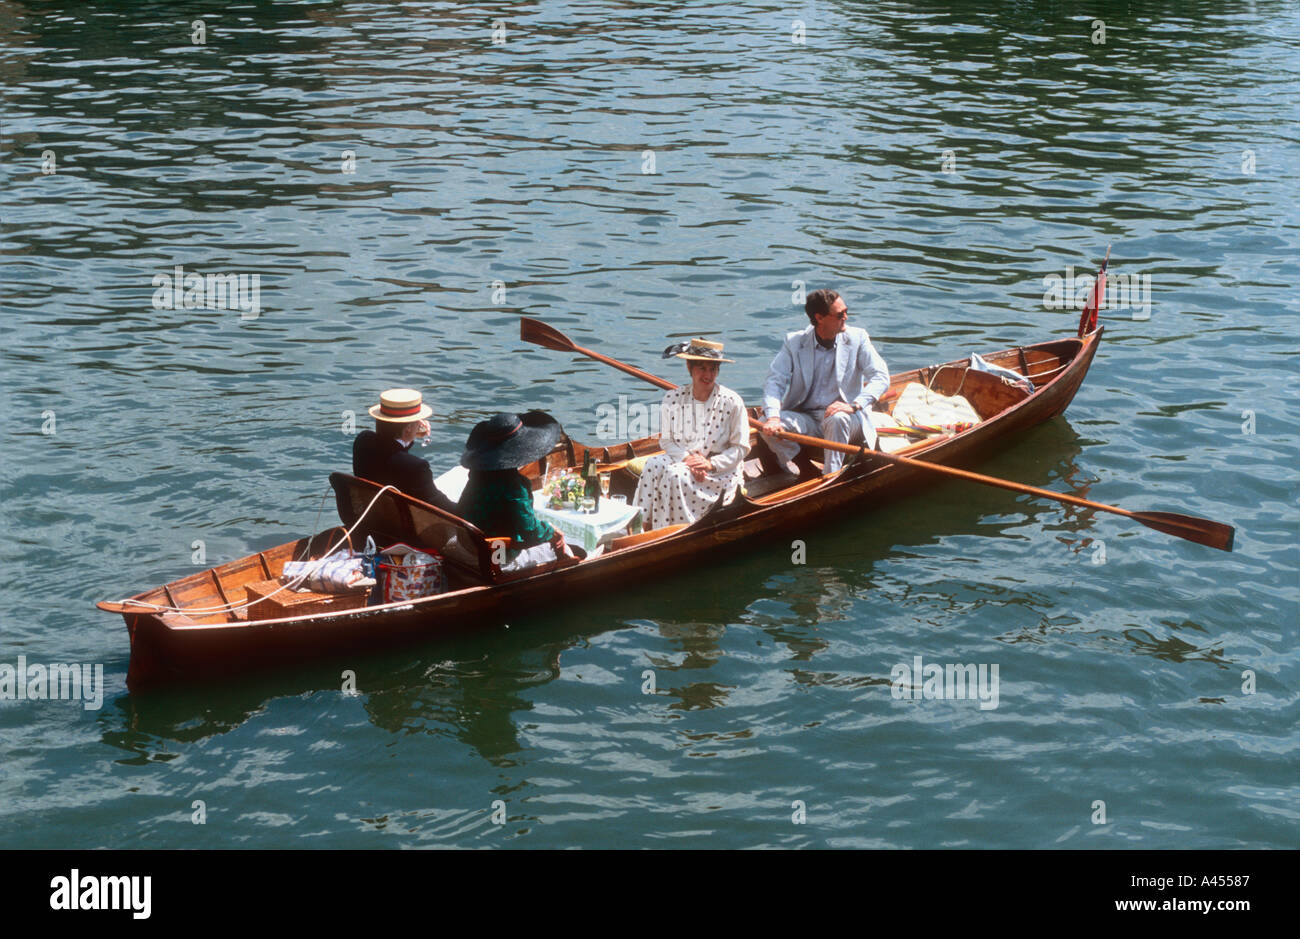 People in a double skiff at Henley Royal Regatta River Thames Henley on Thames Oxfordshire England UK Stock Photo